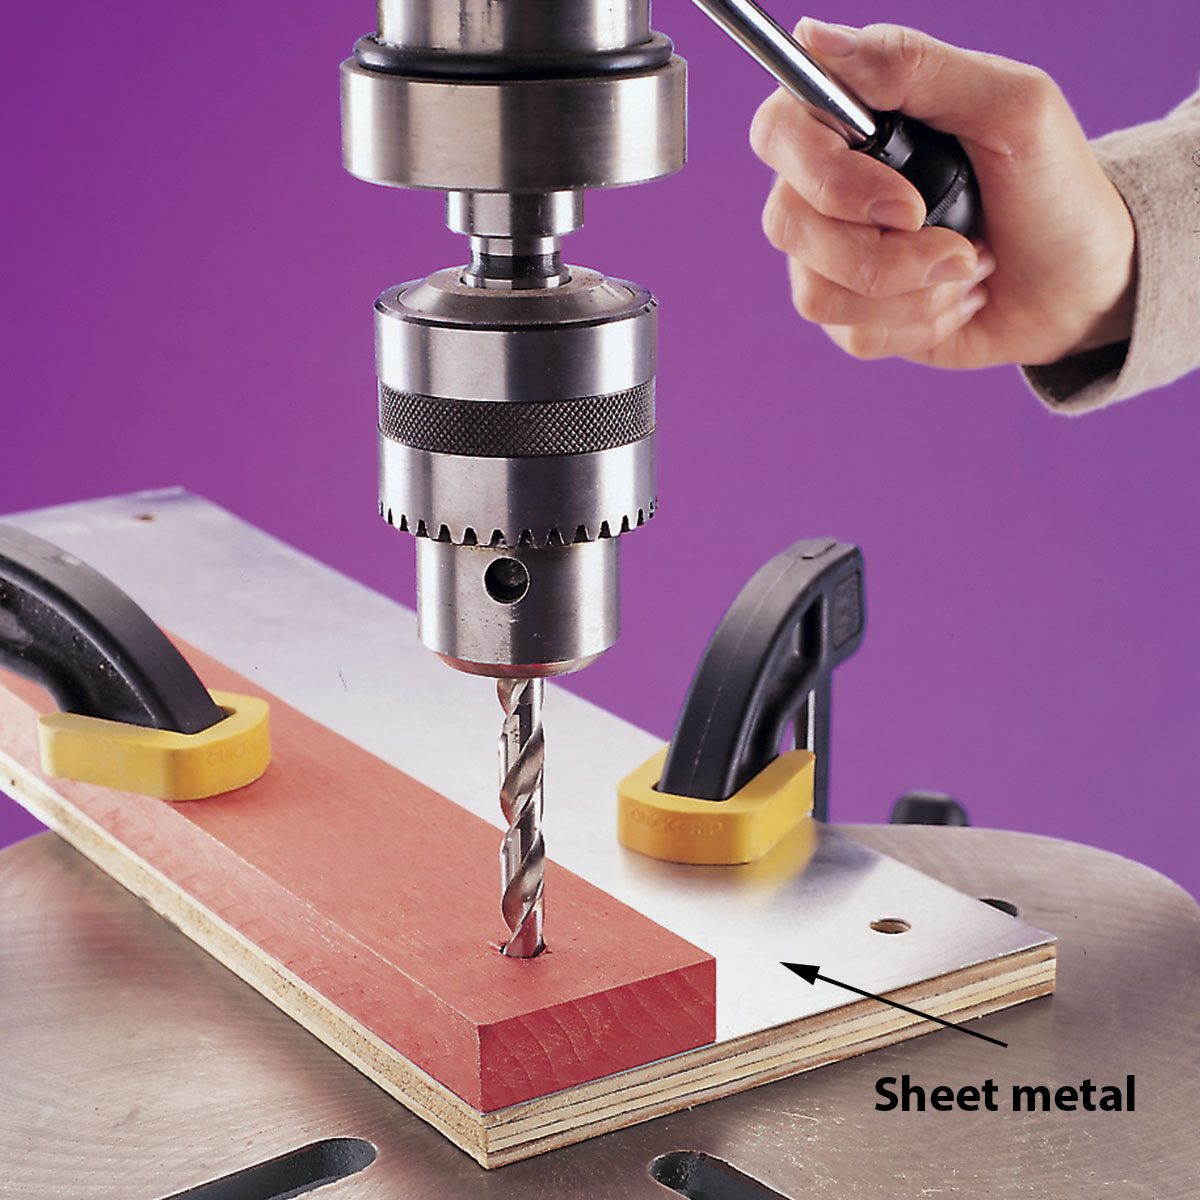 drilling-sheet-metal-shop-tip-from-the-family-handyman